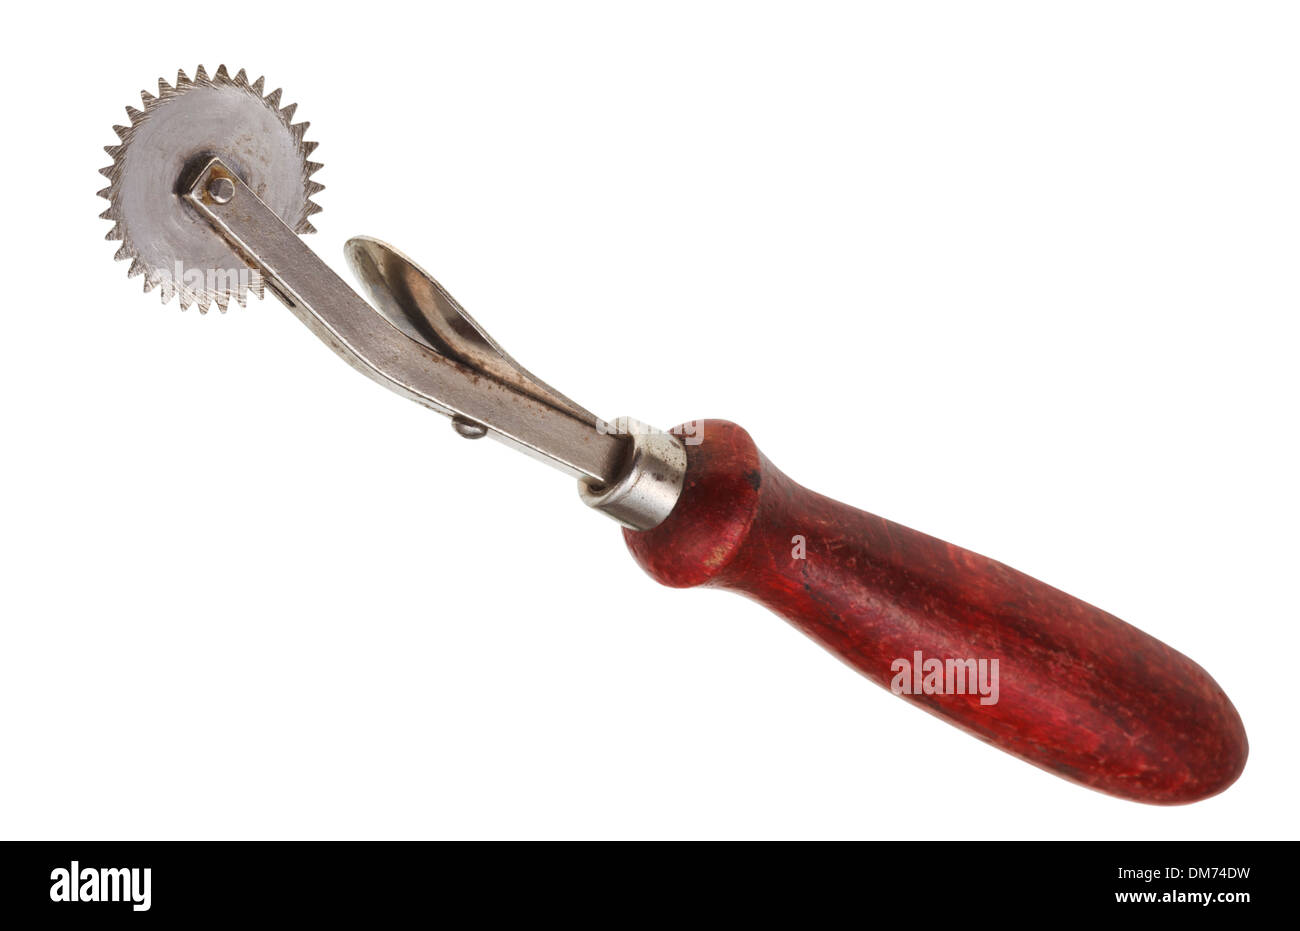 tracing wheel with red wooden handle isolated on white background Stock Photo